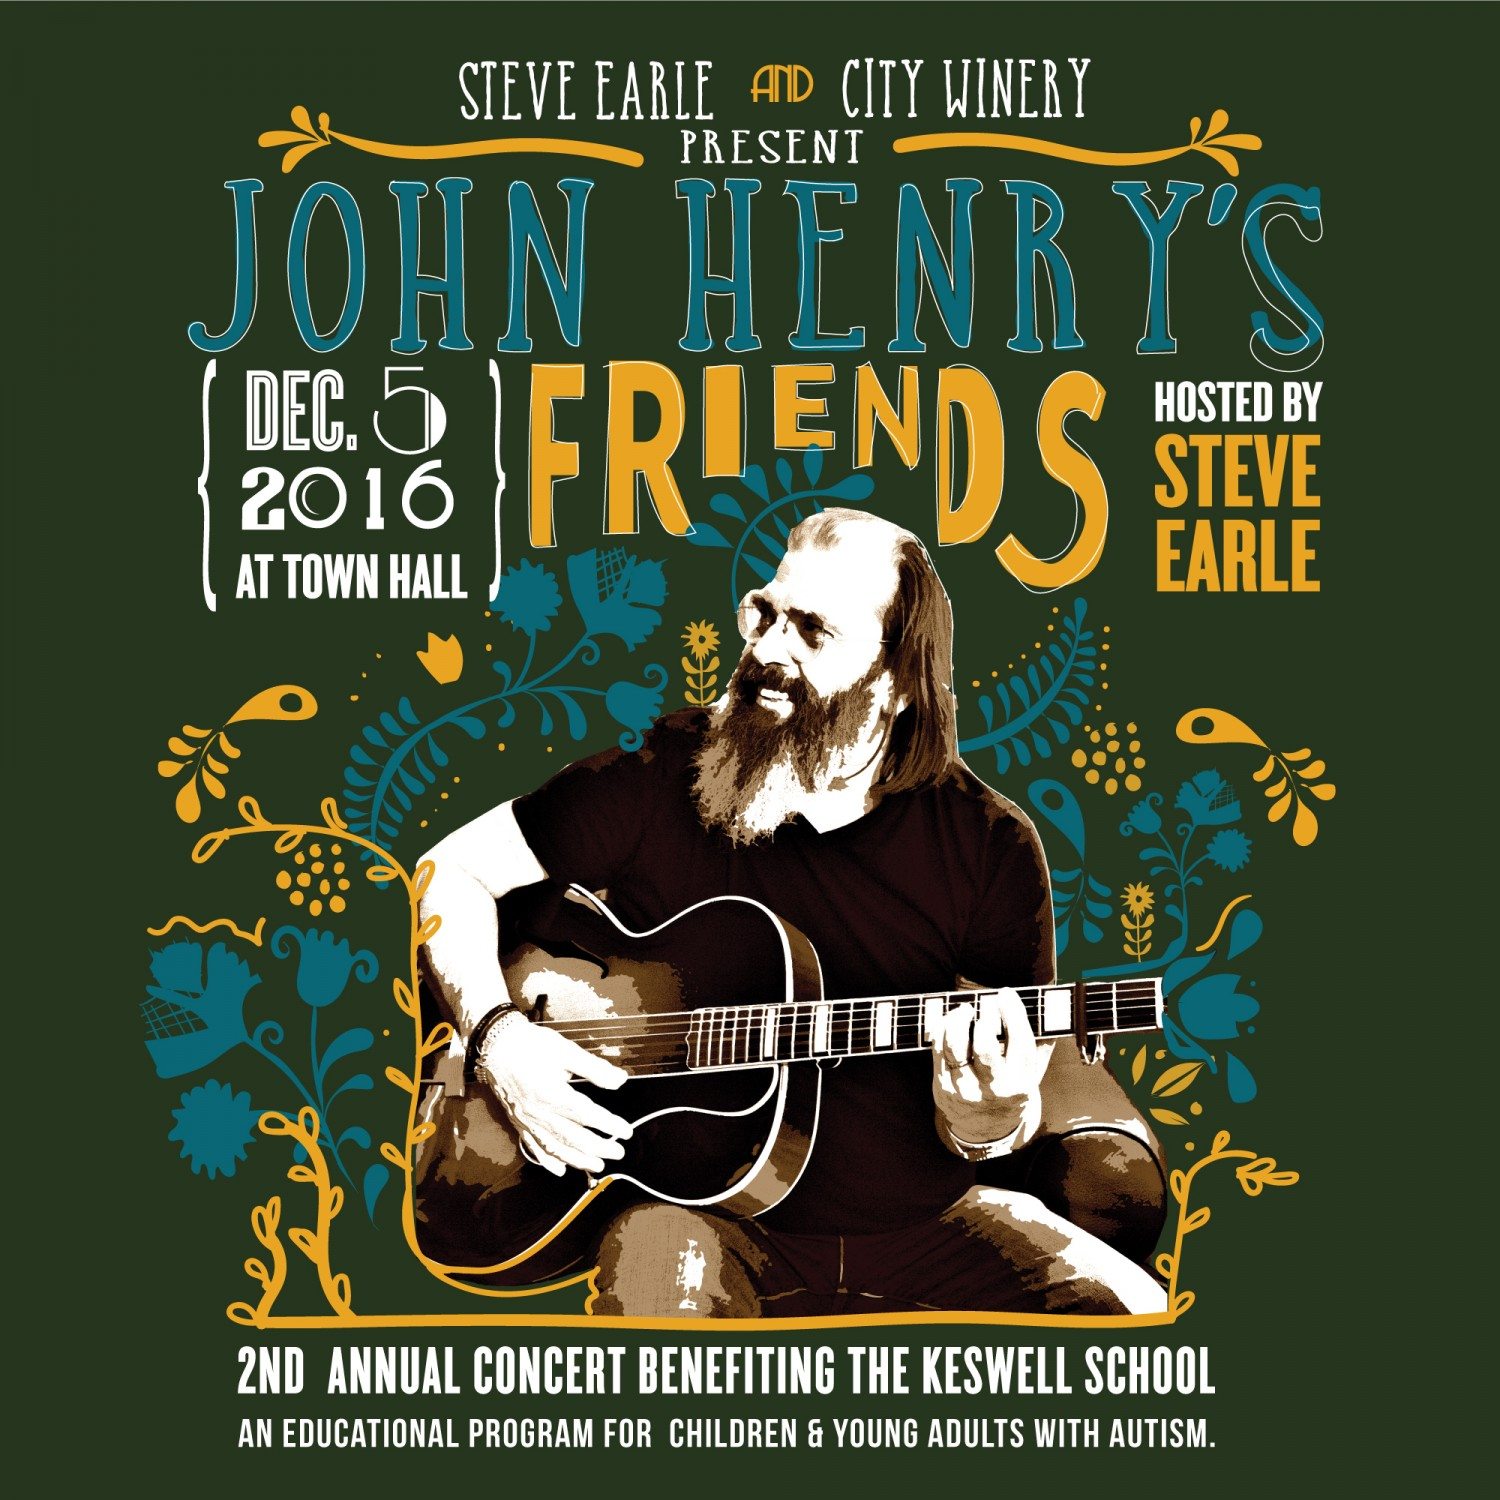 Steve Earle & The Dukes to headline benefit for The Keswell School on Dec. 5 at Town Hall